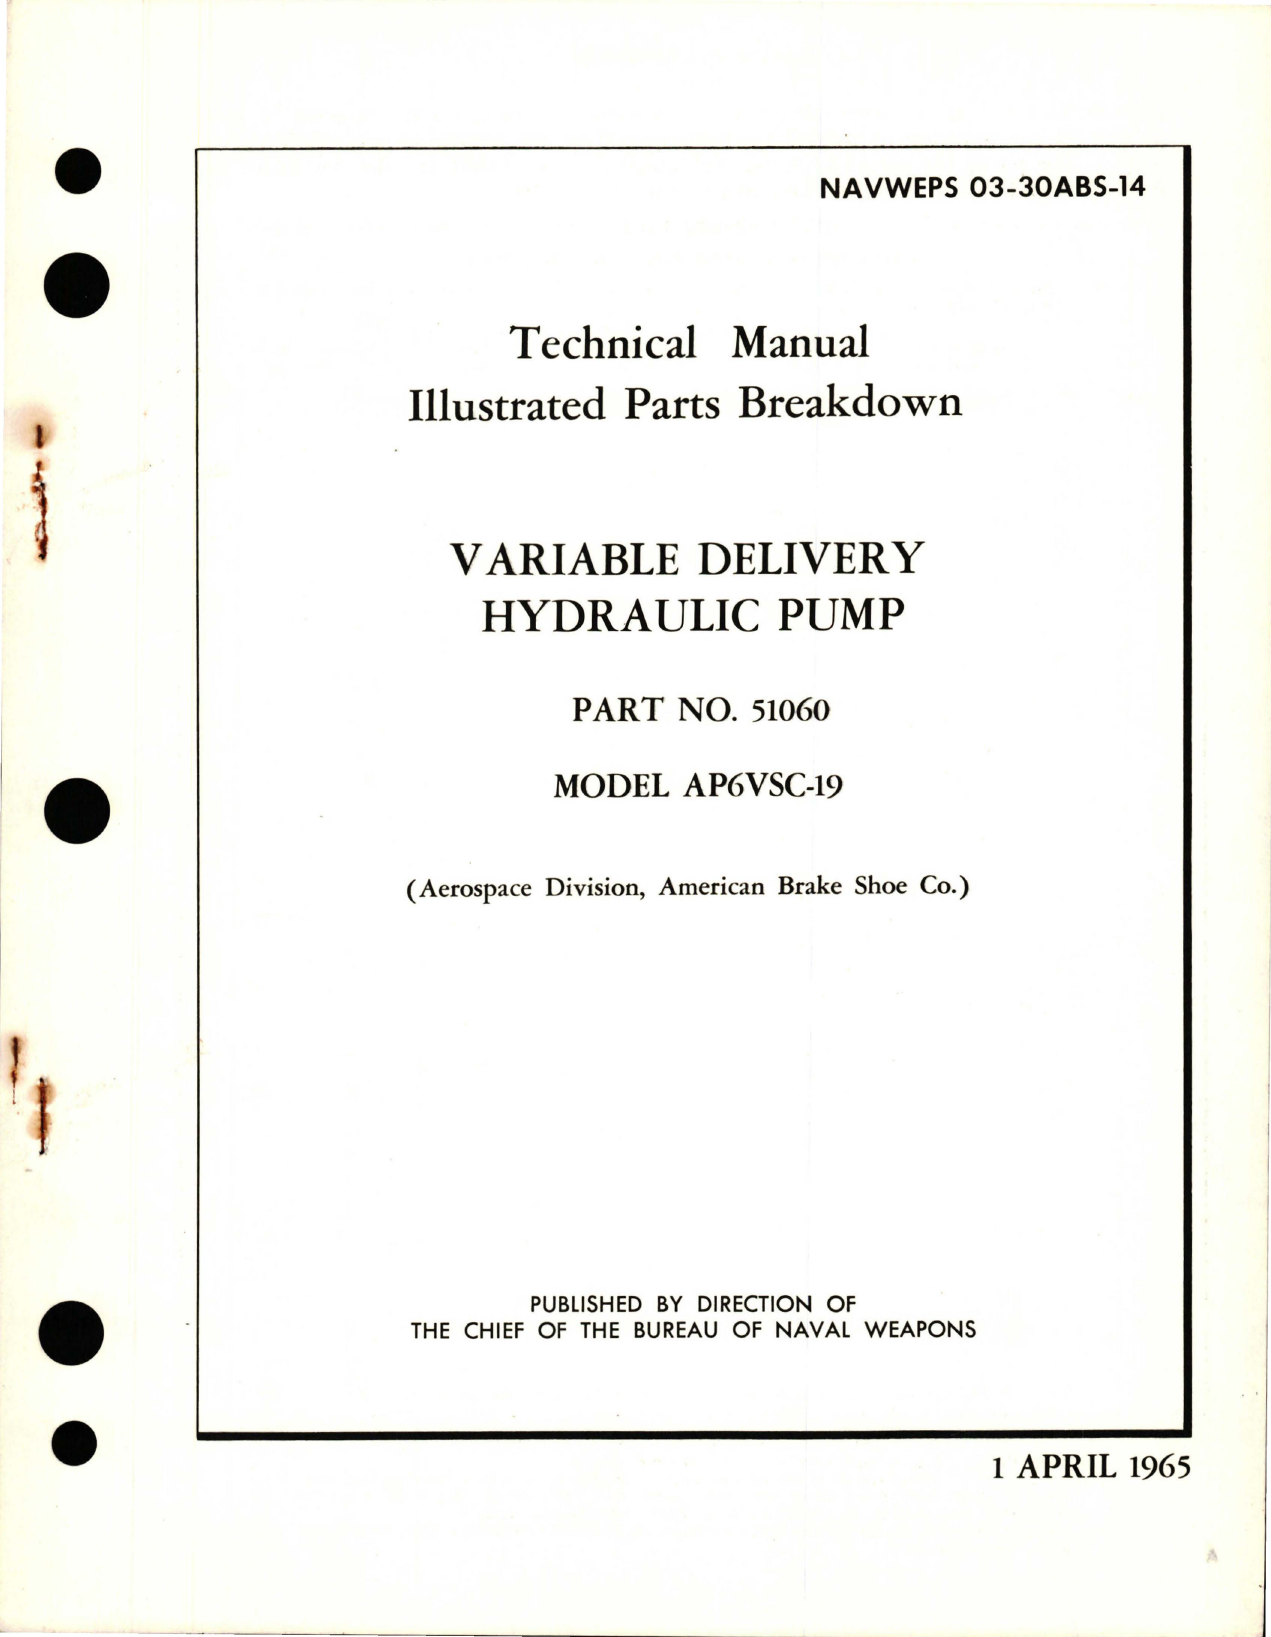 Sample page 1 from AirCorps Library document: Illustrated Parts Breakdown for Variable Delivery Hydraulic Pump - Part 51060 - Model AP6VSC-19